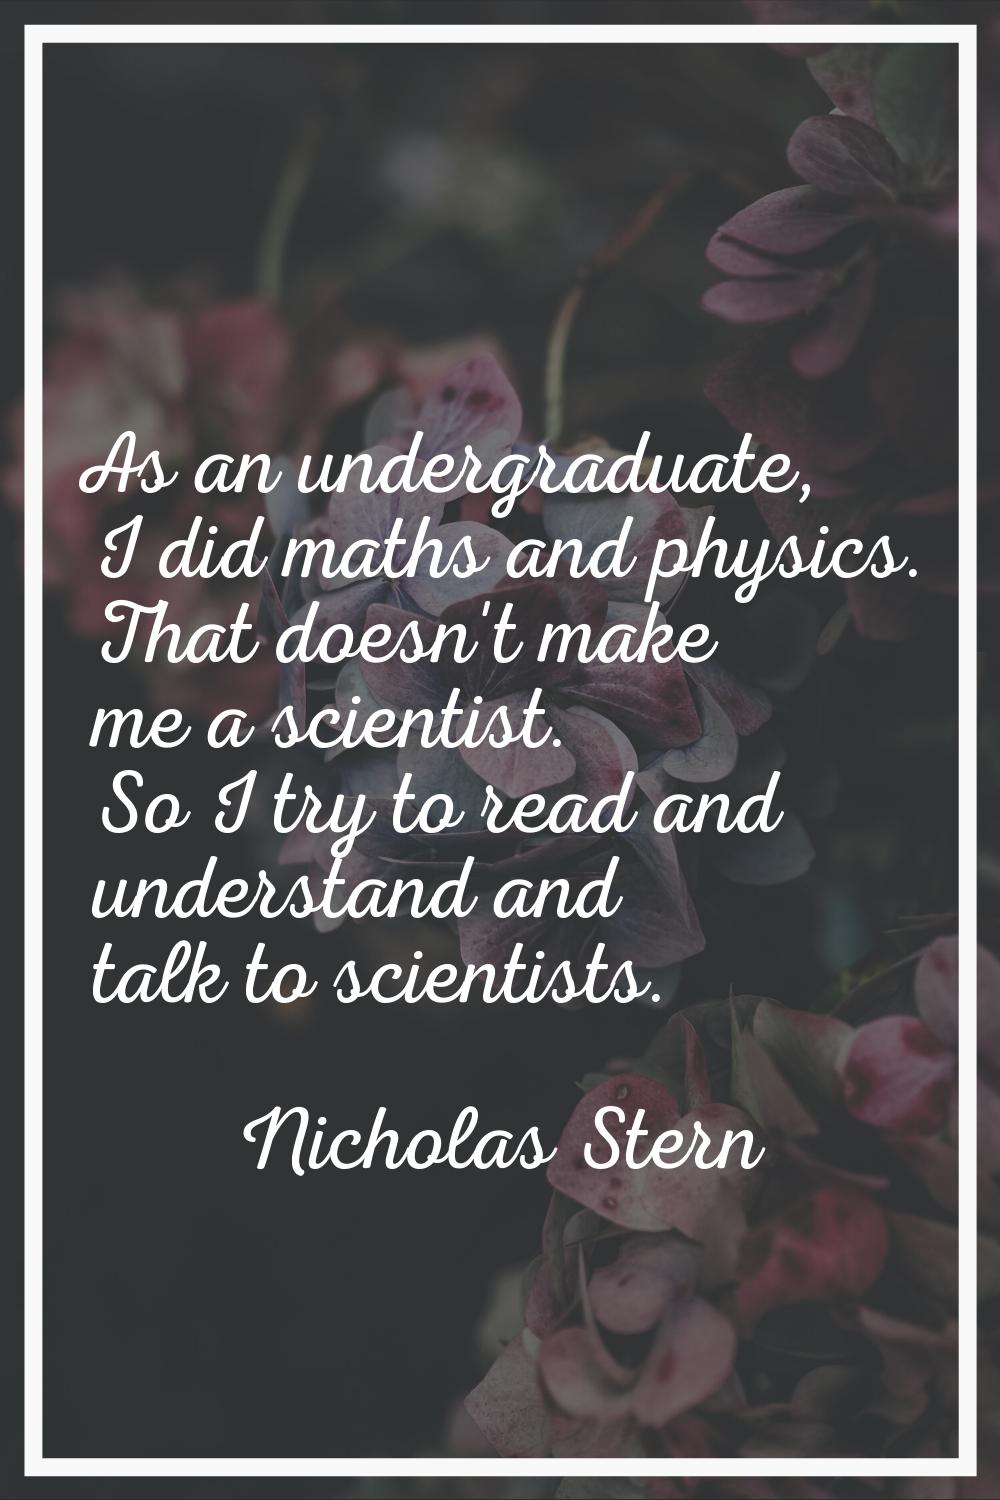 As an undergraduate, I did maths and physics. That doesn't make me a scientist. So I try to read an